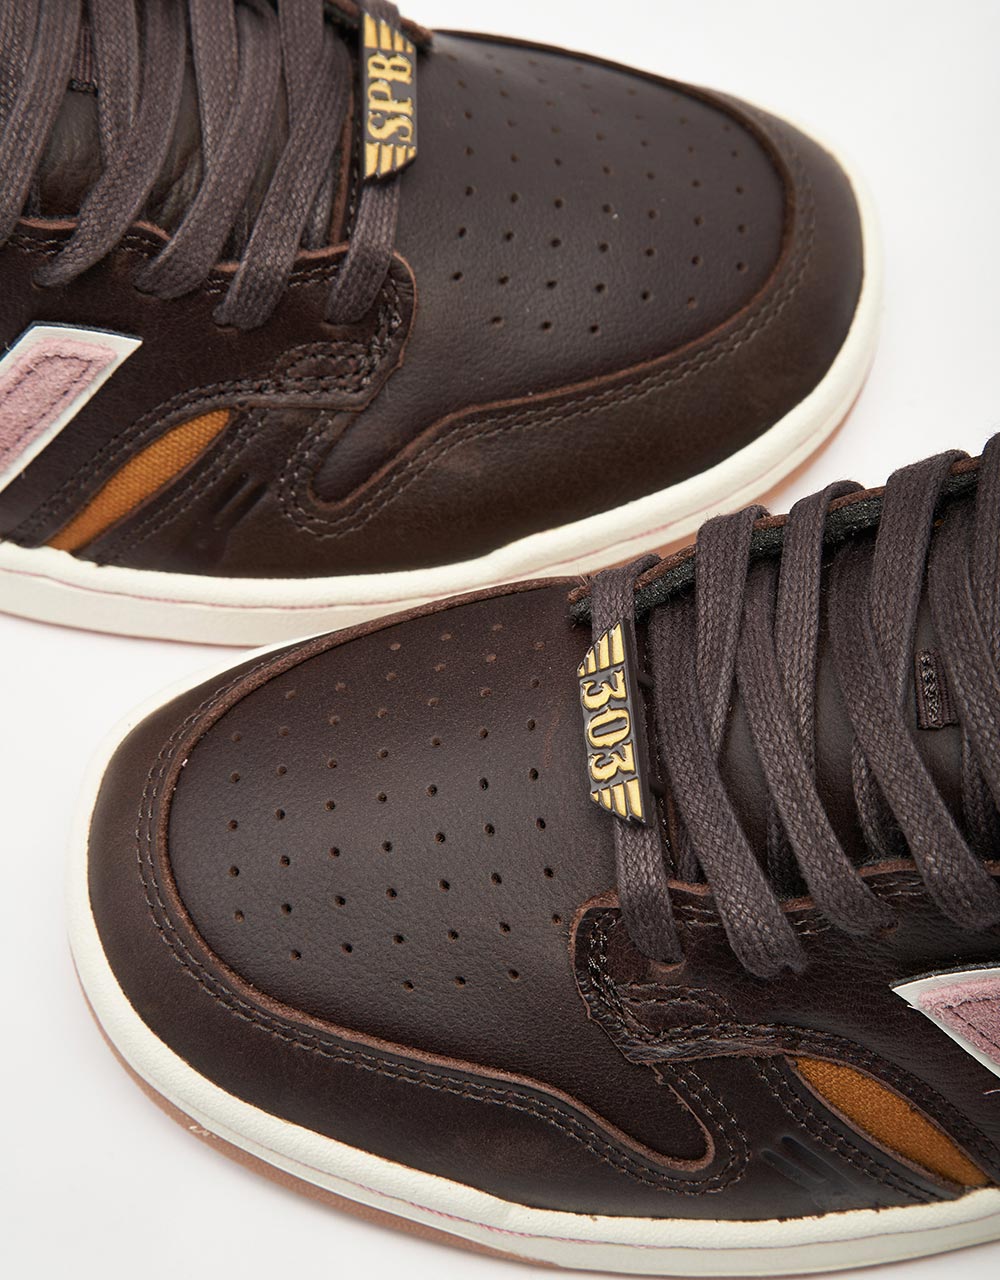 New Balance Numeric x 303 x Jeremy Fish 480 Skate Shoes - Brown/Pink